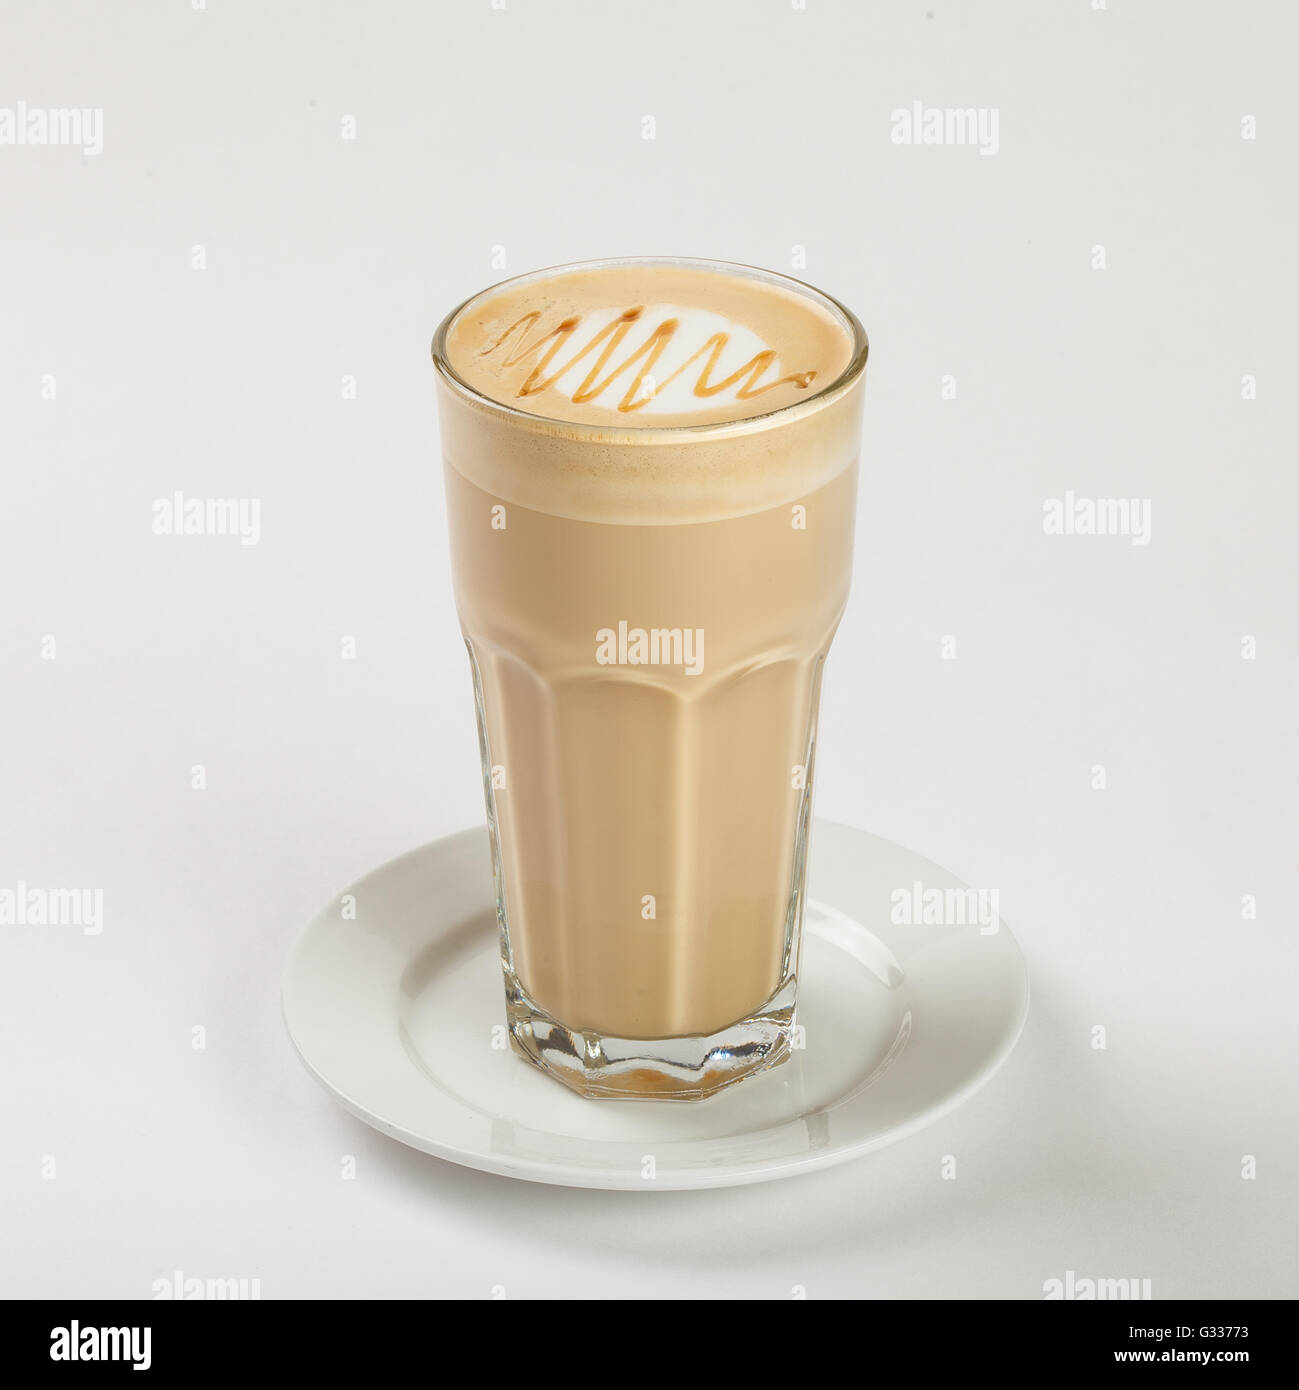 Delicious latte in a tall glass on the plate on white background. Stock Photo